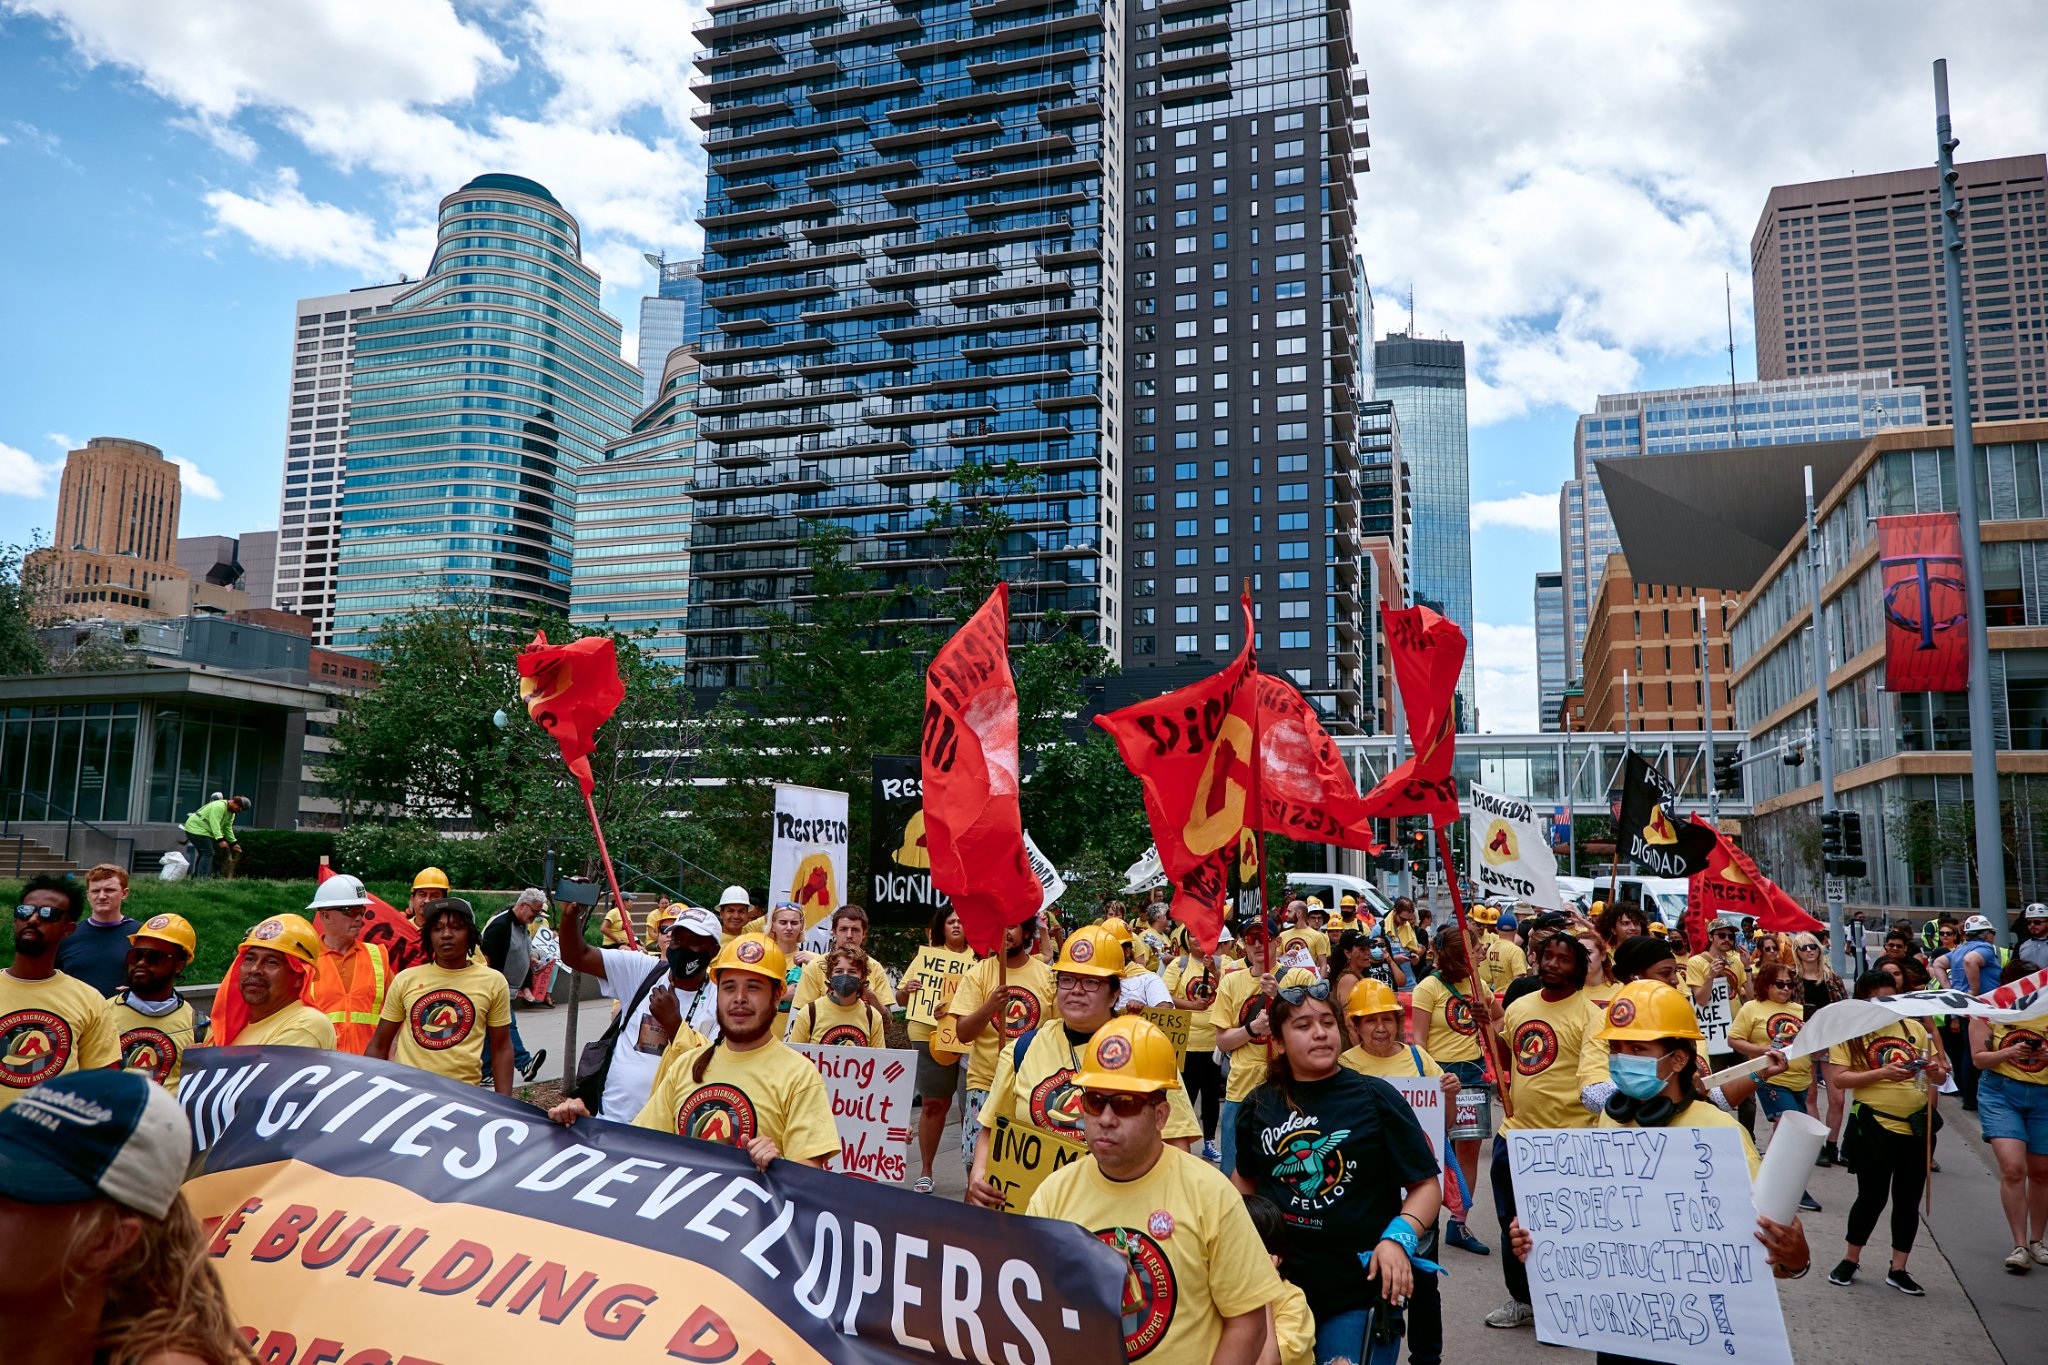 A group of people marching wearing CTUL BDR shirts